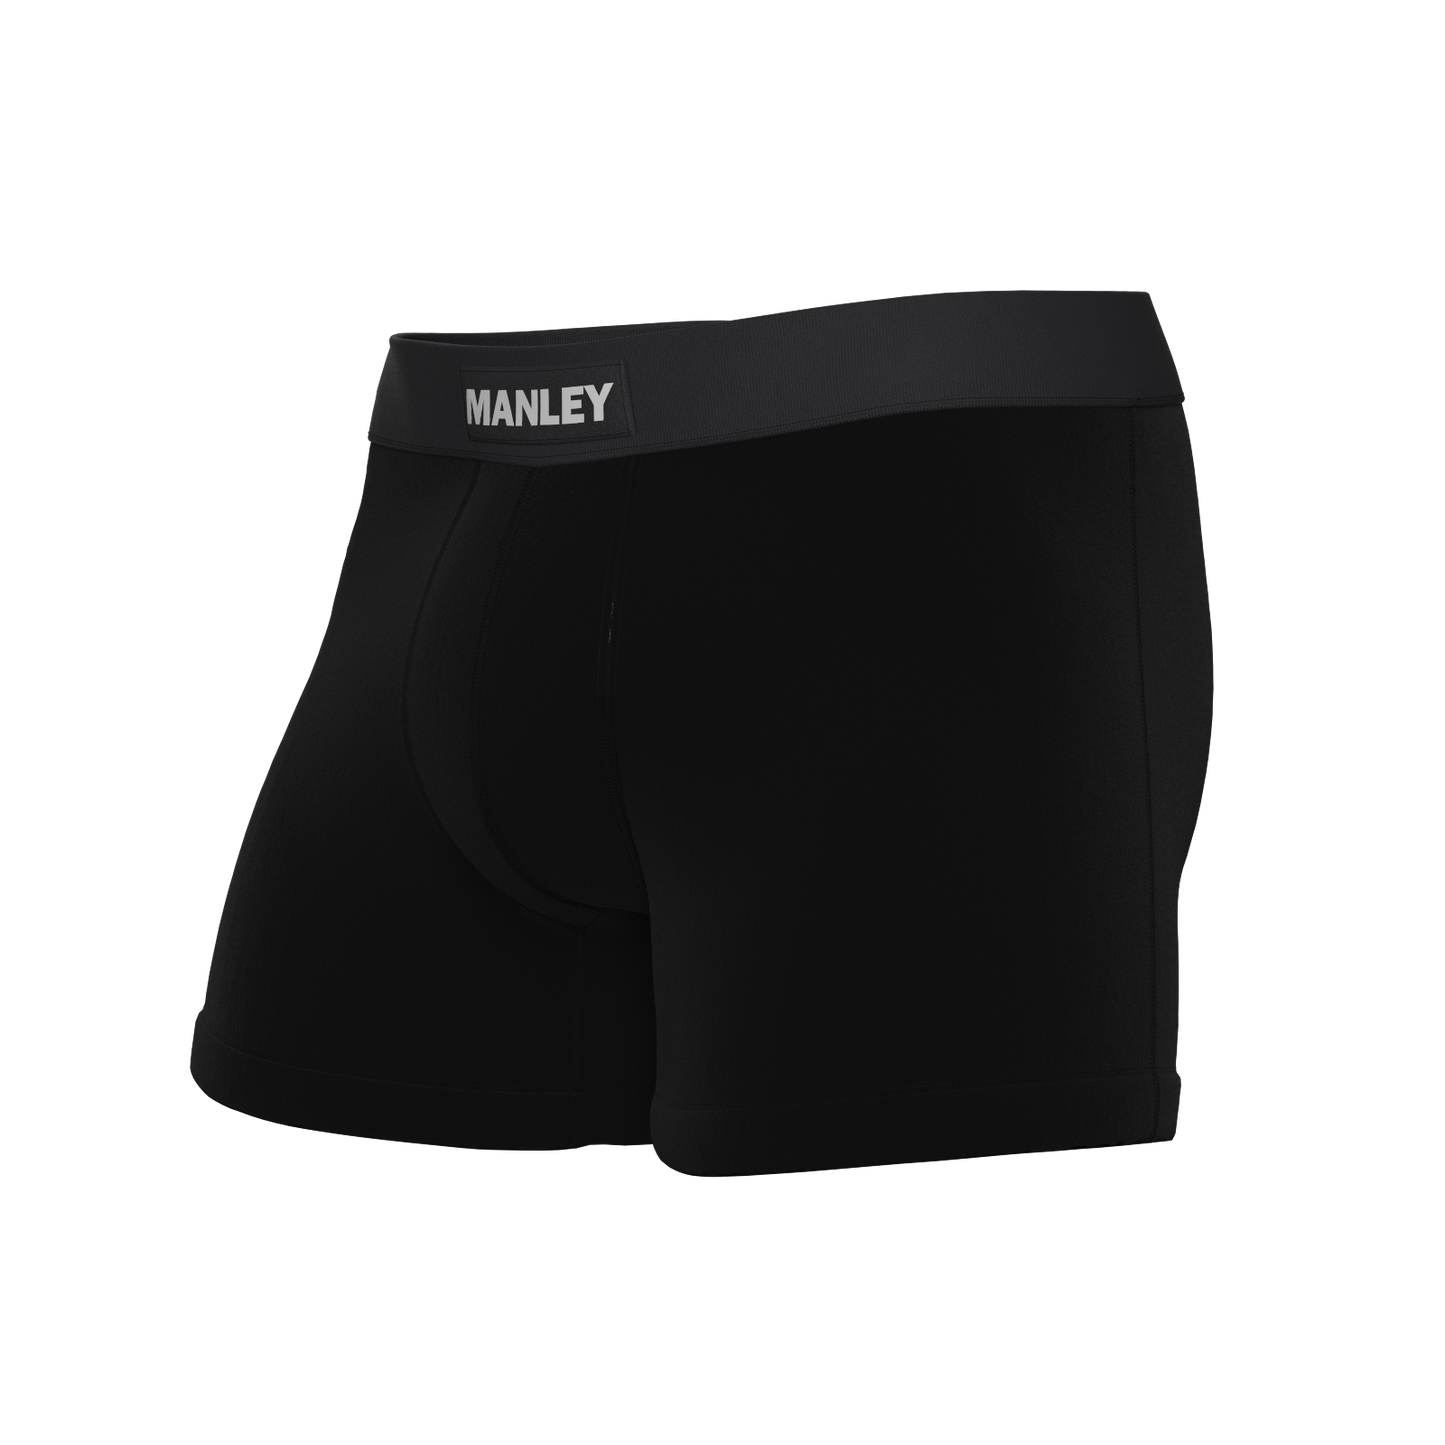 Underwear that Stops the Pee Spot  In The Navy – Manley Barrier Apparel